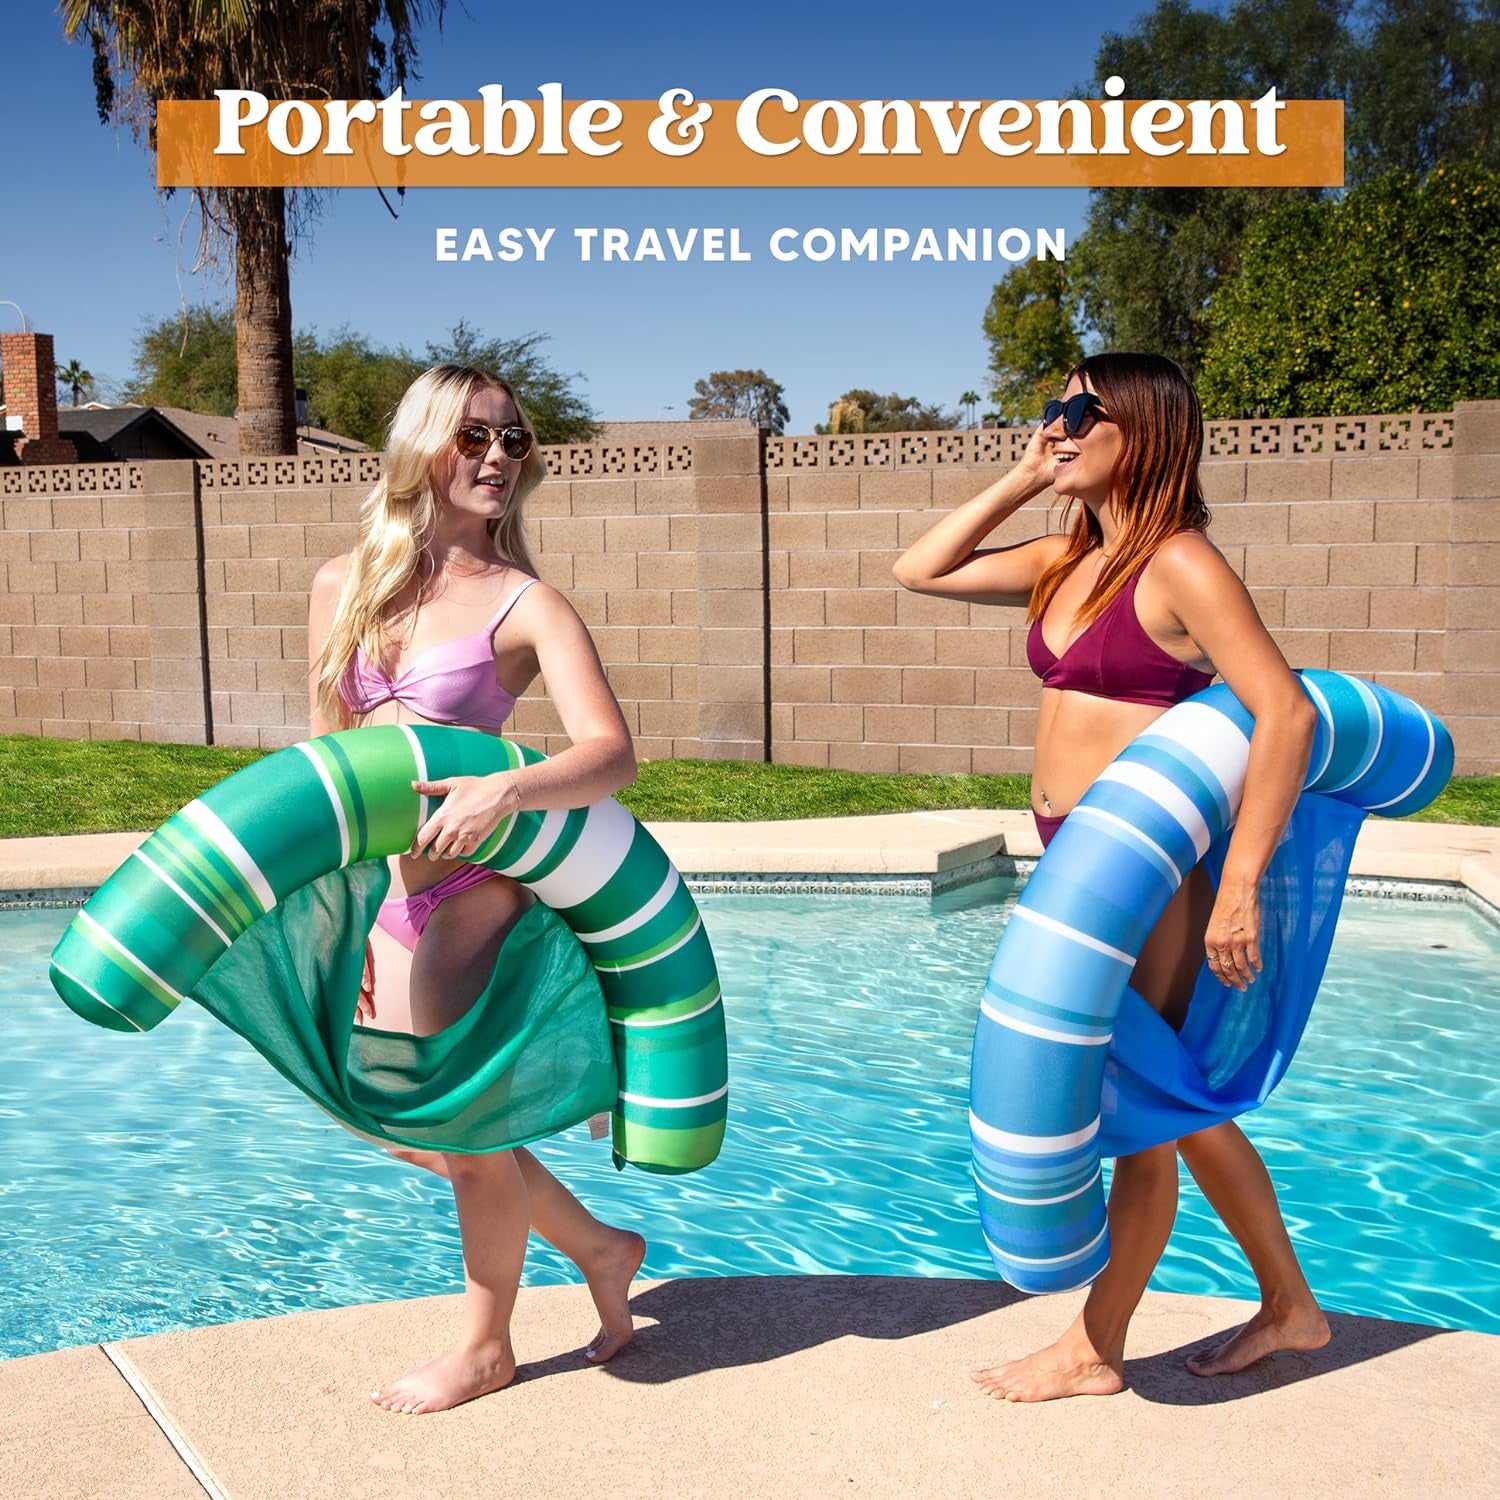 Inflatable Pool Floats Chairs Adults, 2 Packs Floating Noodle Chair with Stripes Design Soft Fabric Covered with Sling for Swimming Pool Water Chair Pool Lounger Party Floaties